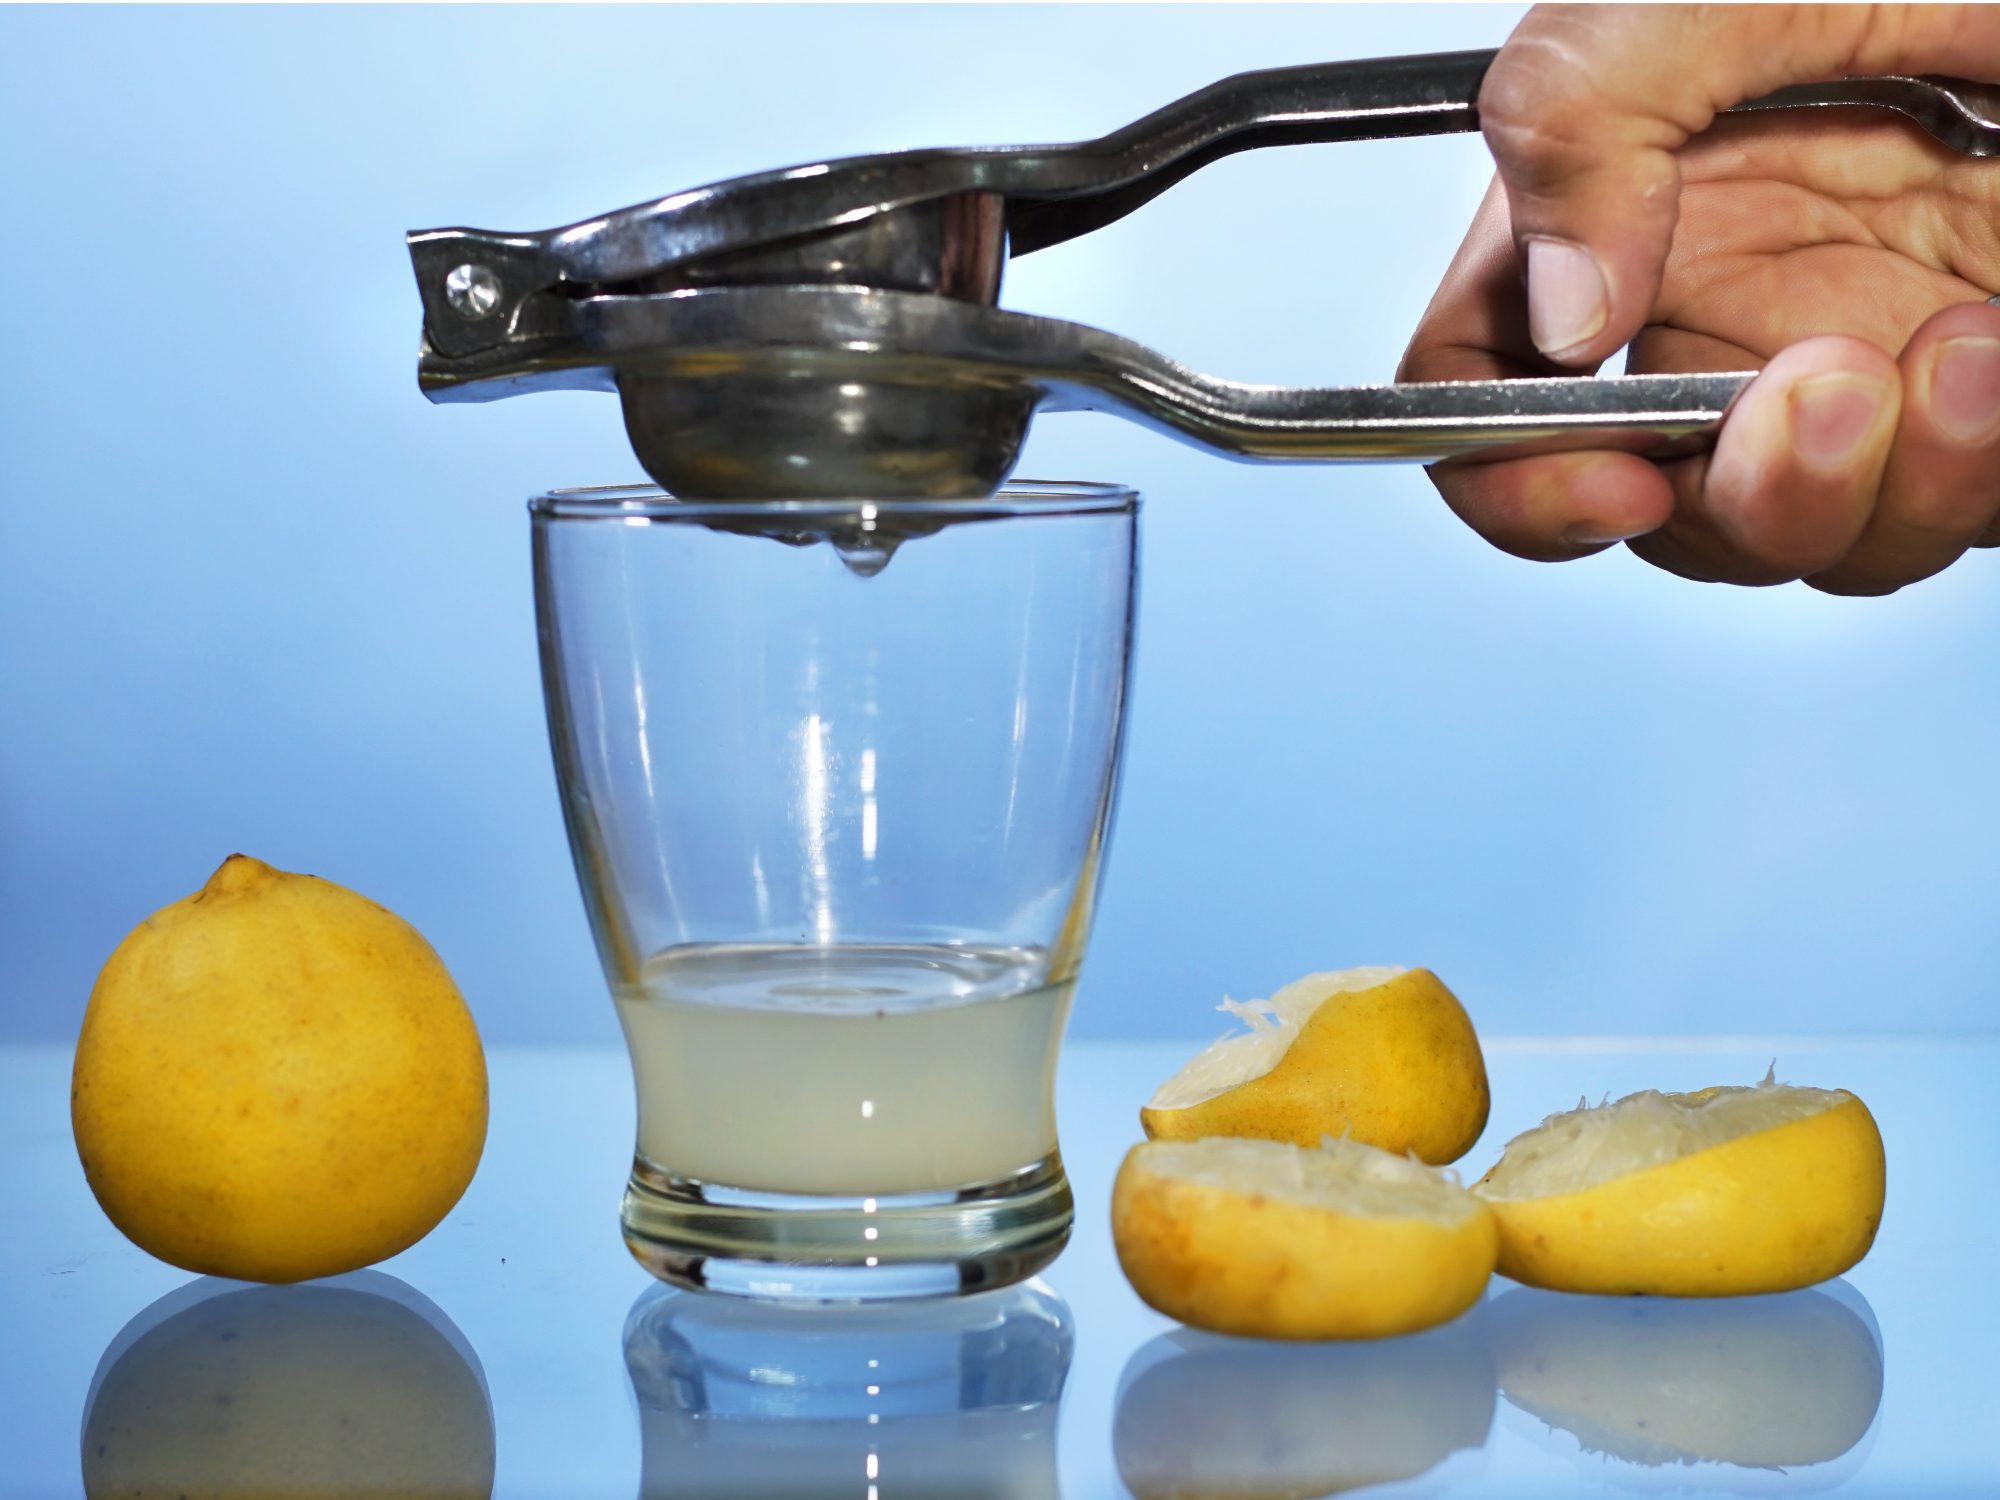 How much is the juice of one lemon?